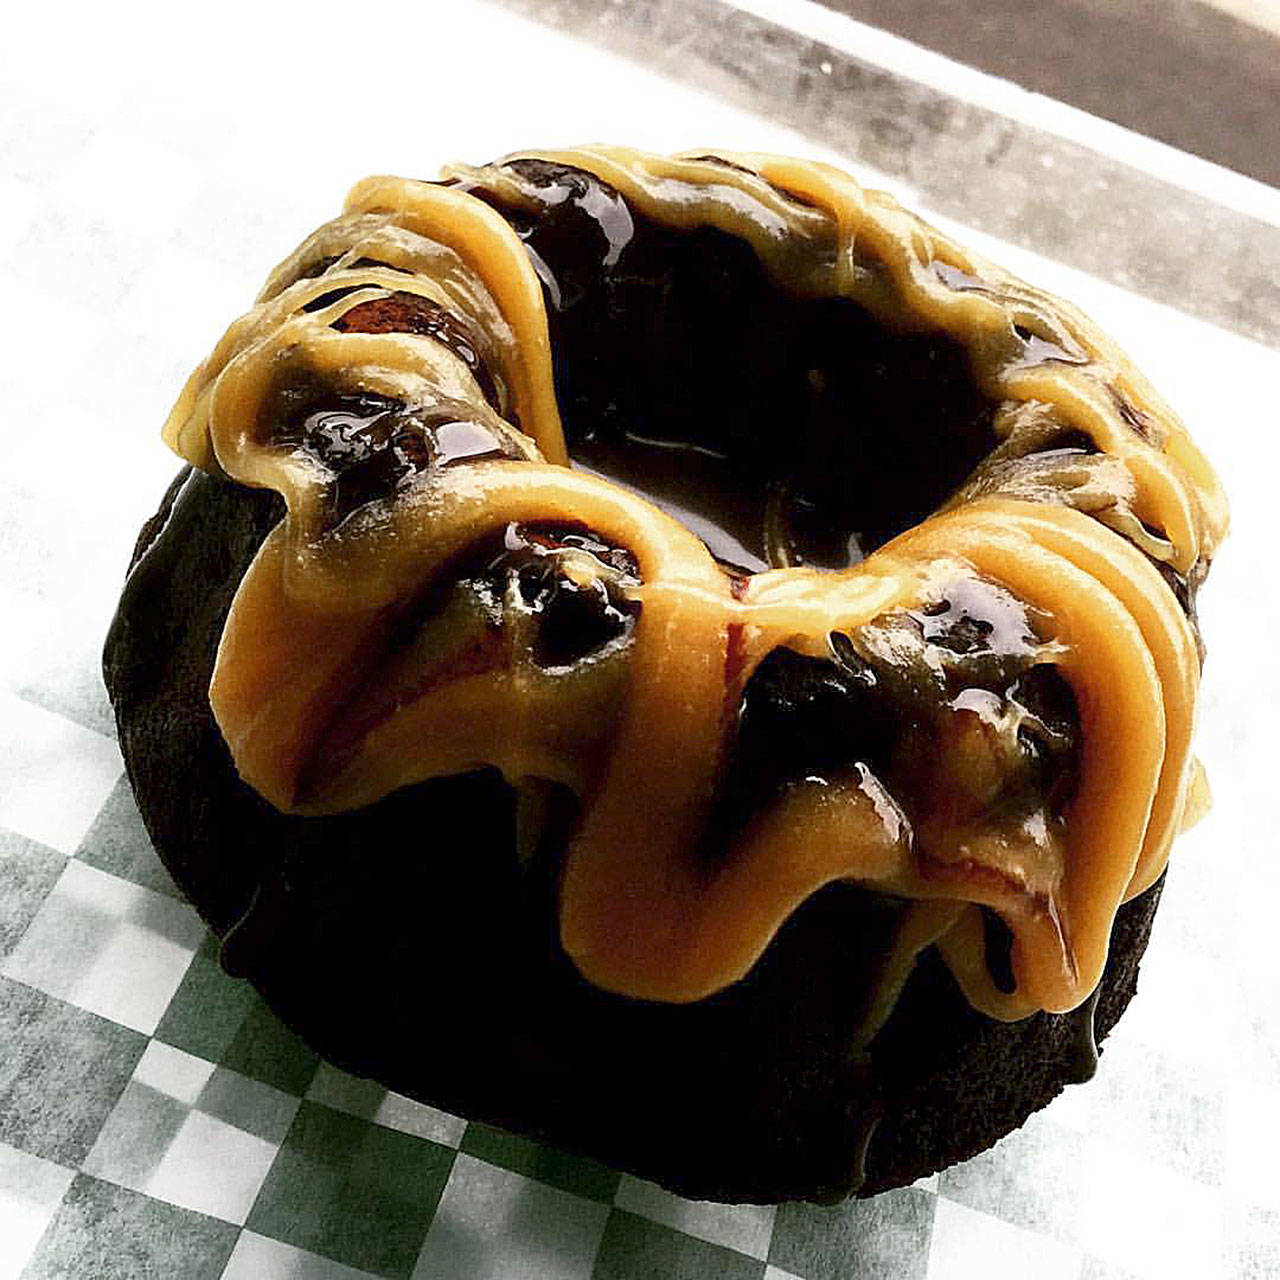 Laughing Dog Kitchen’s chocolate bundt cake with coconut caramel drizzle sells like hot cakes in retail locations.                                Photo courtesy Danielle George / Laughing Dog Kitchen